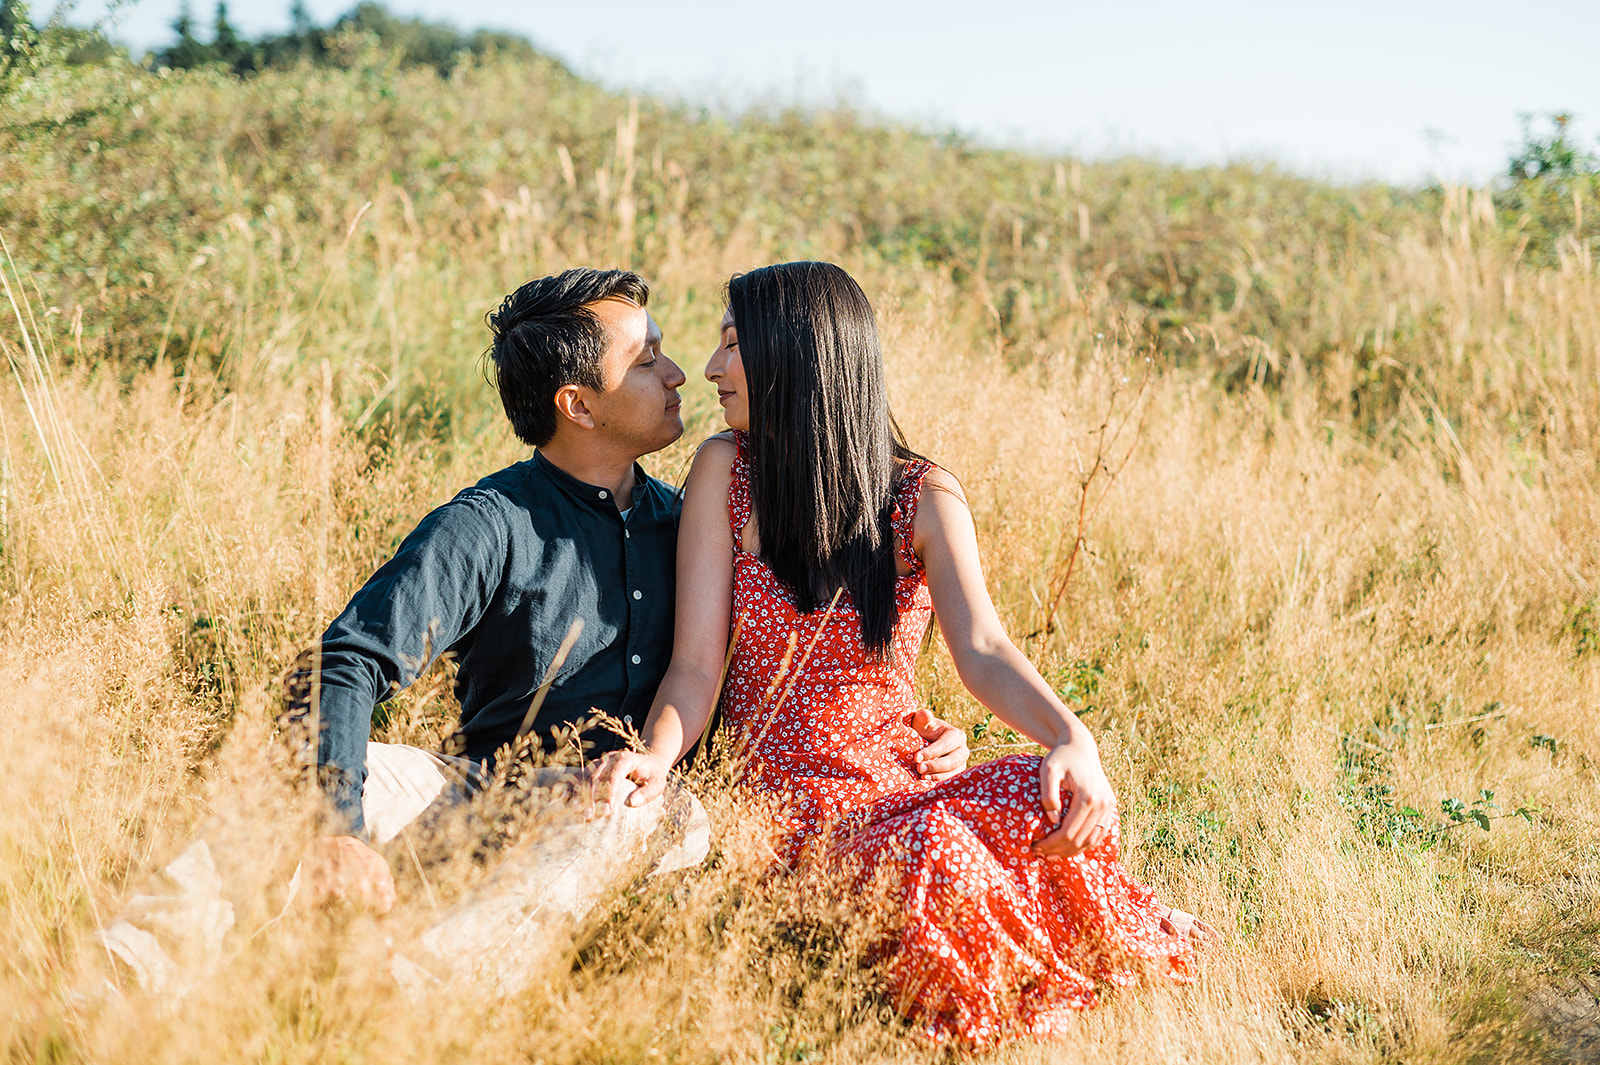 Outdoorsy Seattle Engagement Photos, Discovery Park Engagement Photos, Captured by Candace Photography, Seattle Engagement Photographer